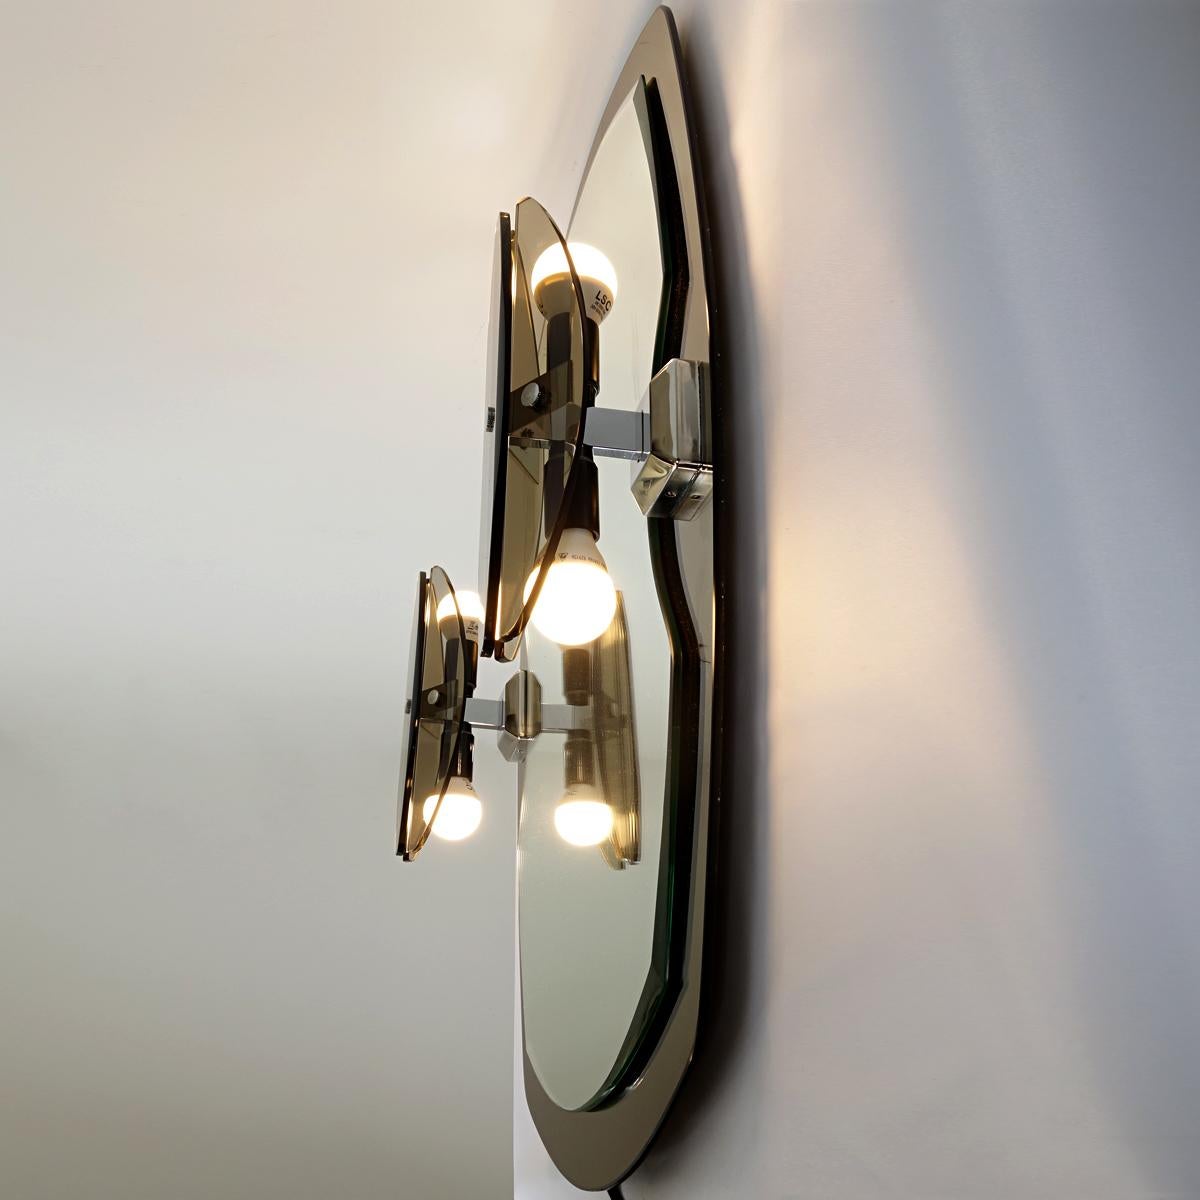 Mid-20th Century Hollywood Regency Two-Toned Mirror with Lights made by Veca For Sale